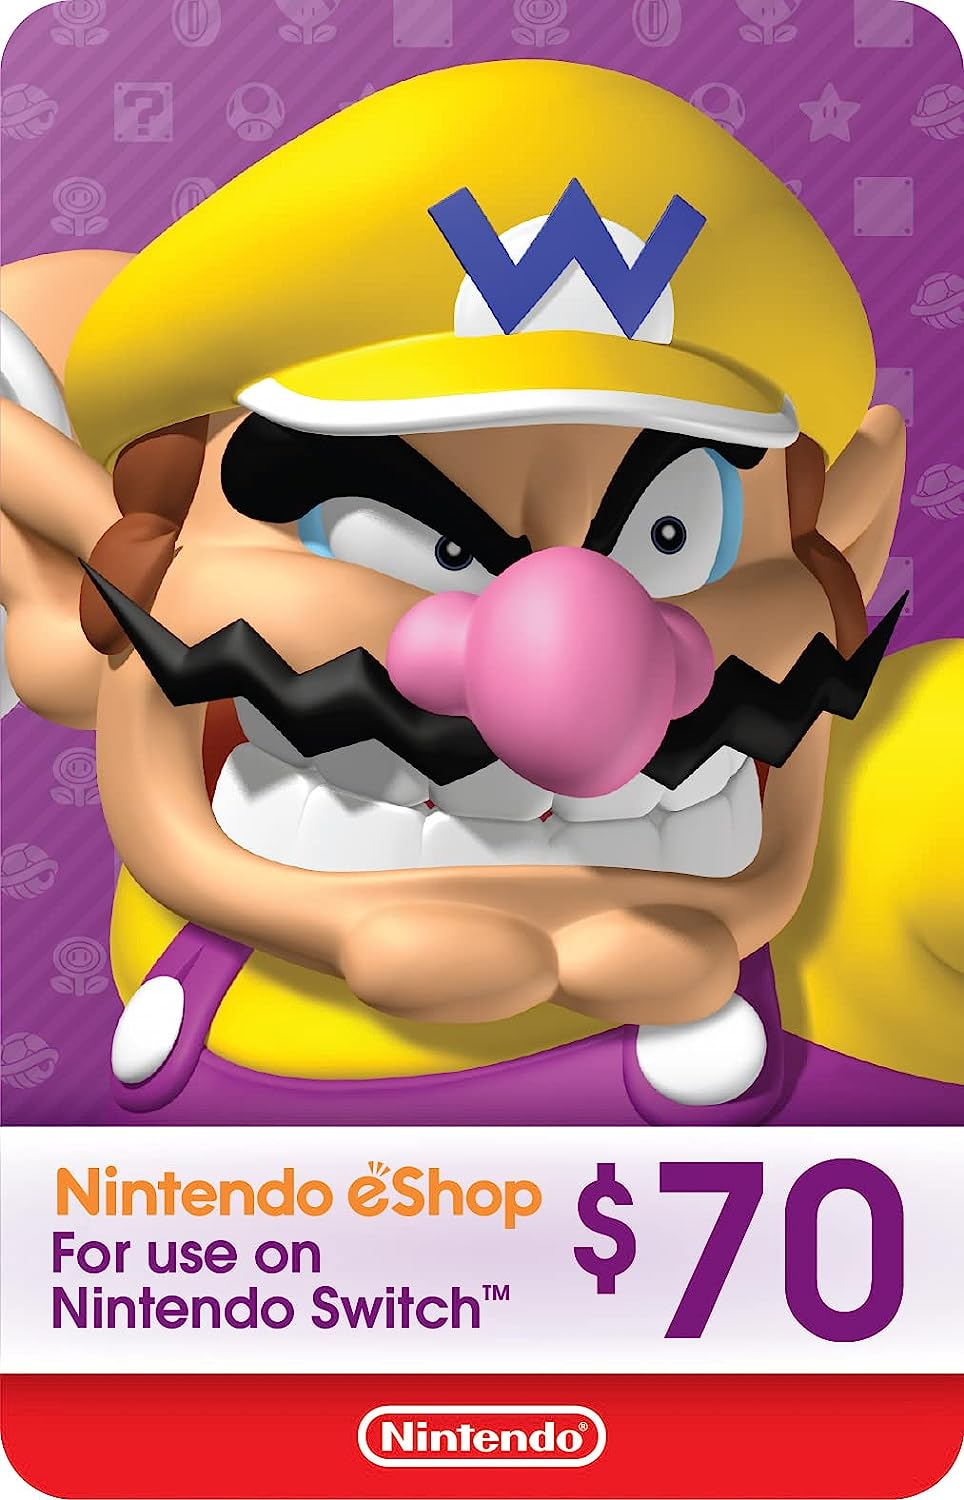 Nintendo eShop gift cards are 10 percent off for Cyber Monday